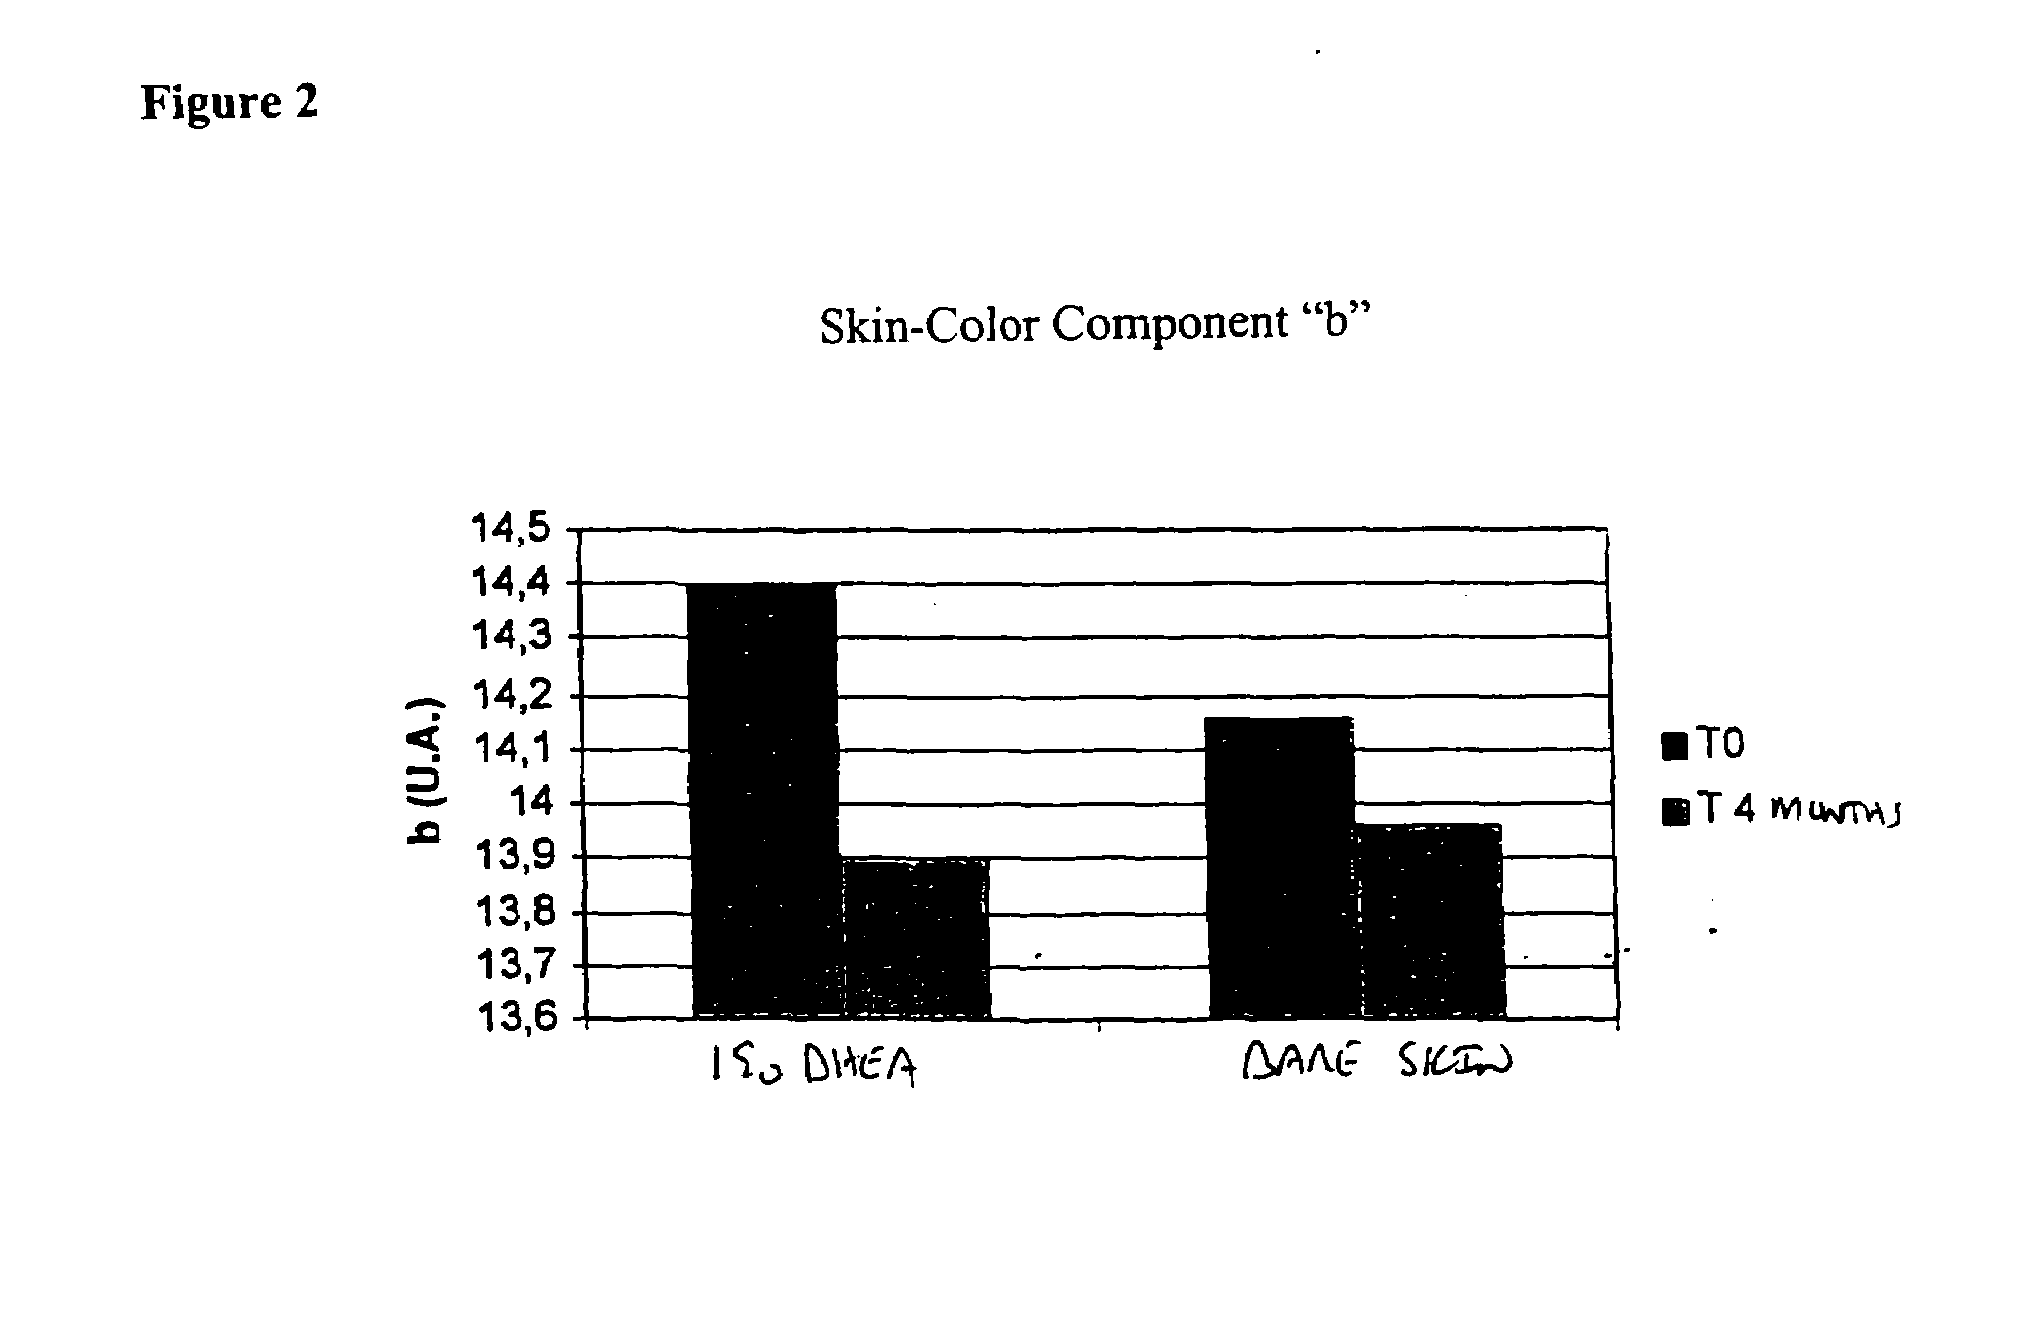 Use of dhea or precursors or metabolic derivatives thereof as a depigmenting agent